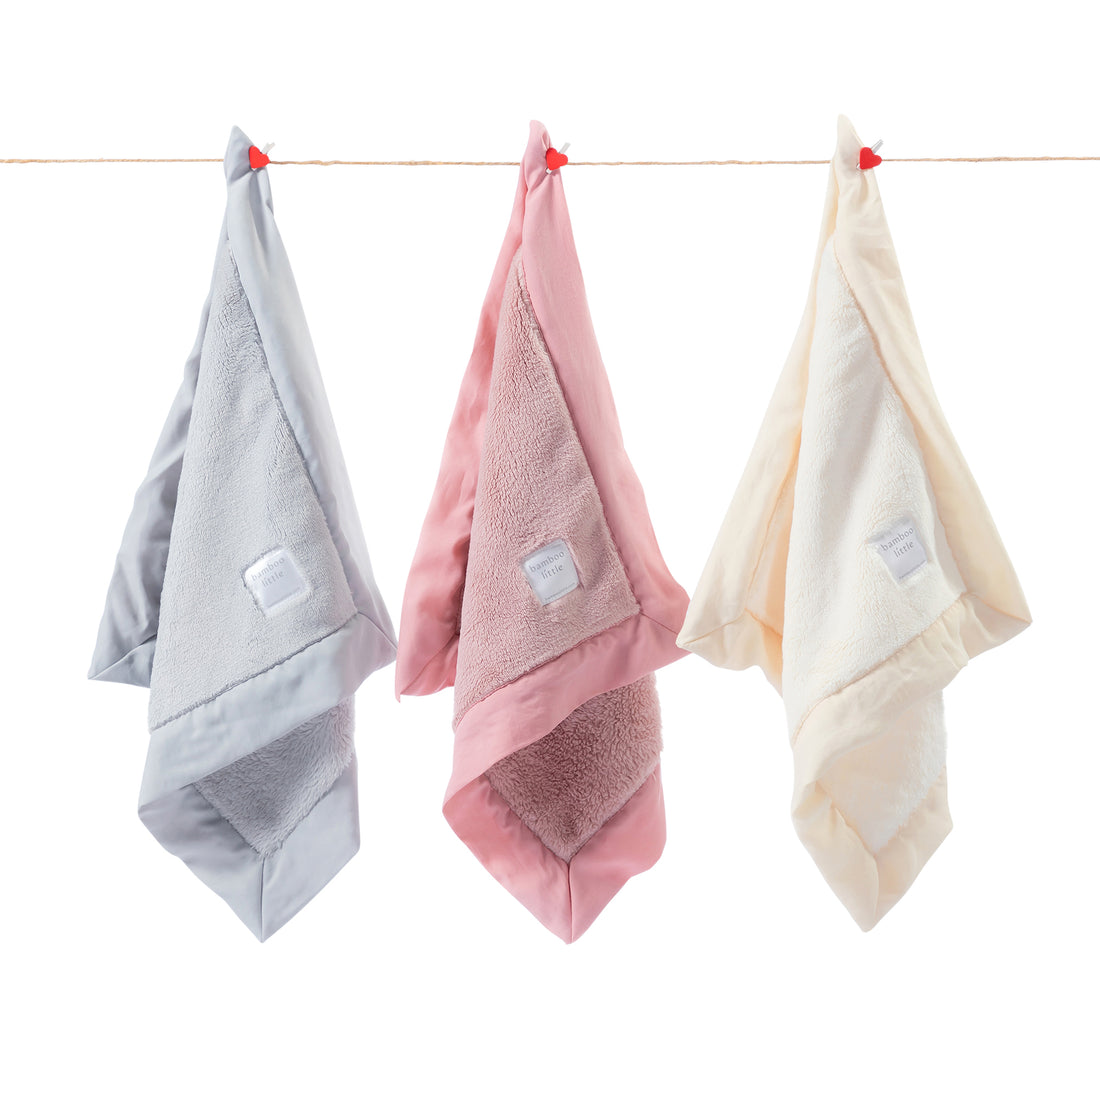 Why do babies love security blankets with satin trim? – Bamboo Little